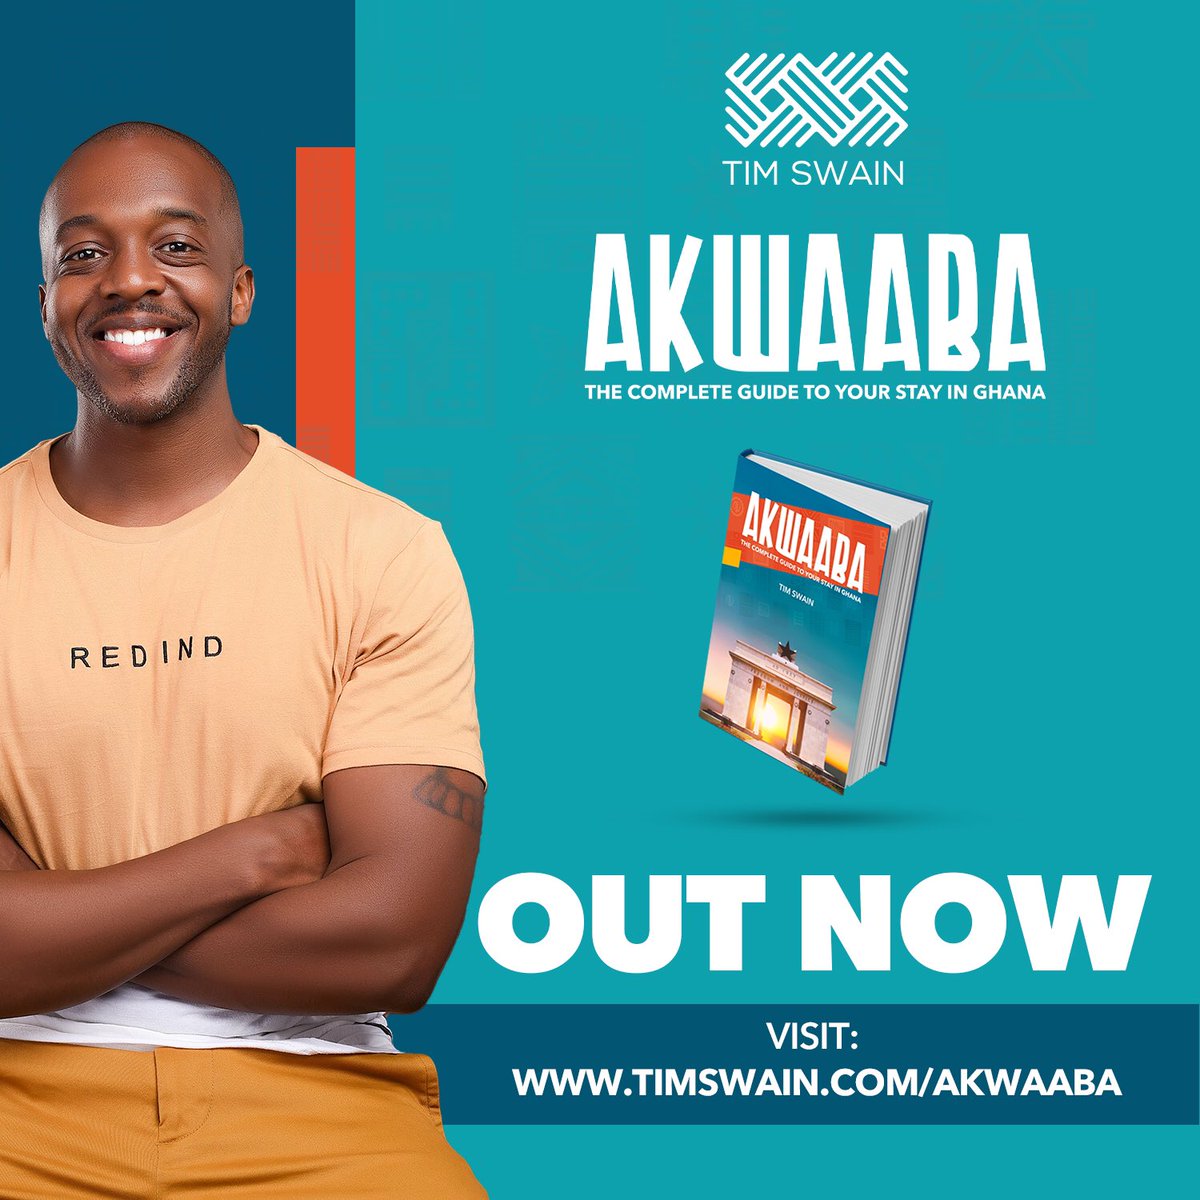 Get your complete Ghana Guide today! 🇬🇭 timswain.com/akwaaba